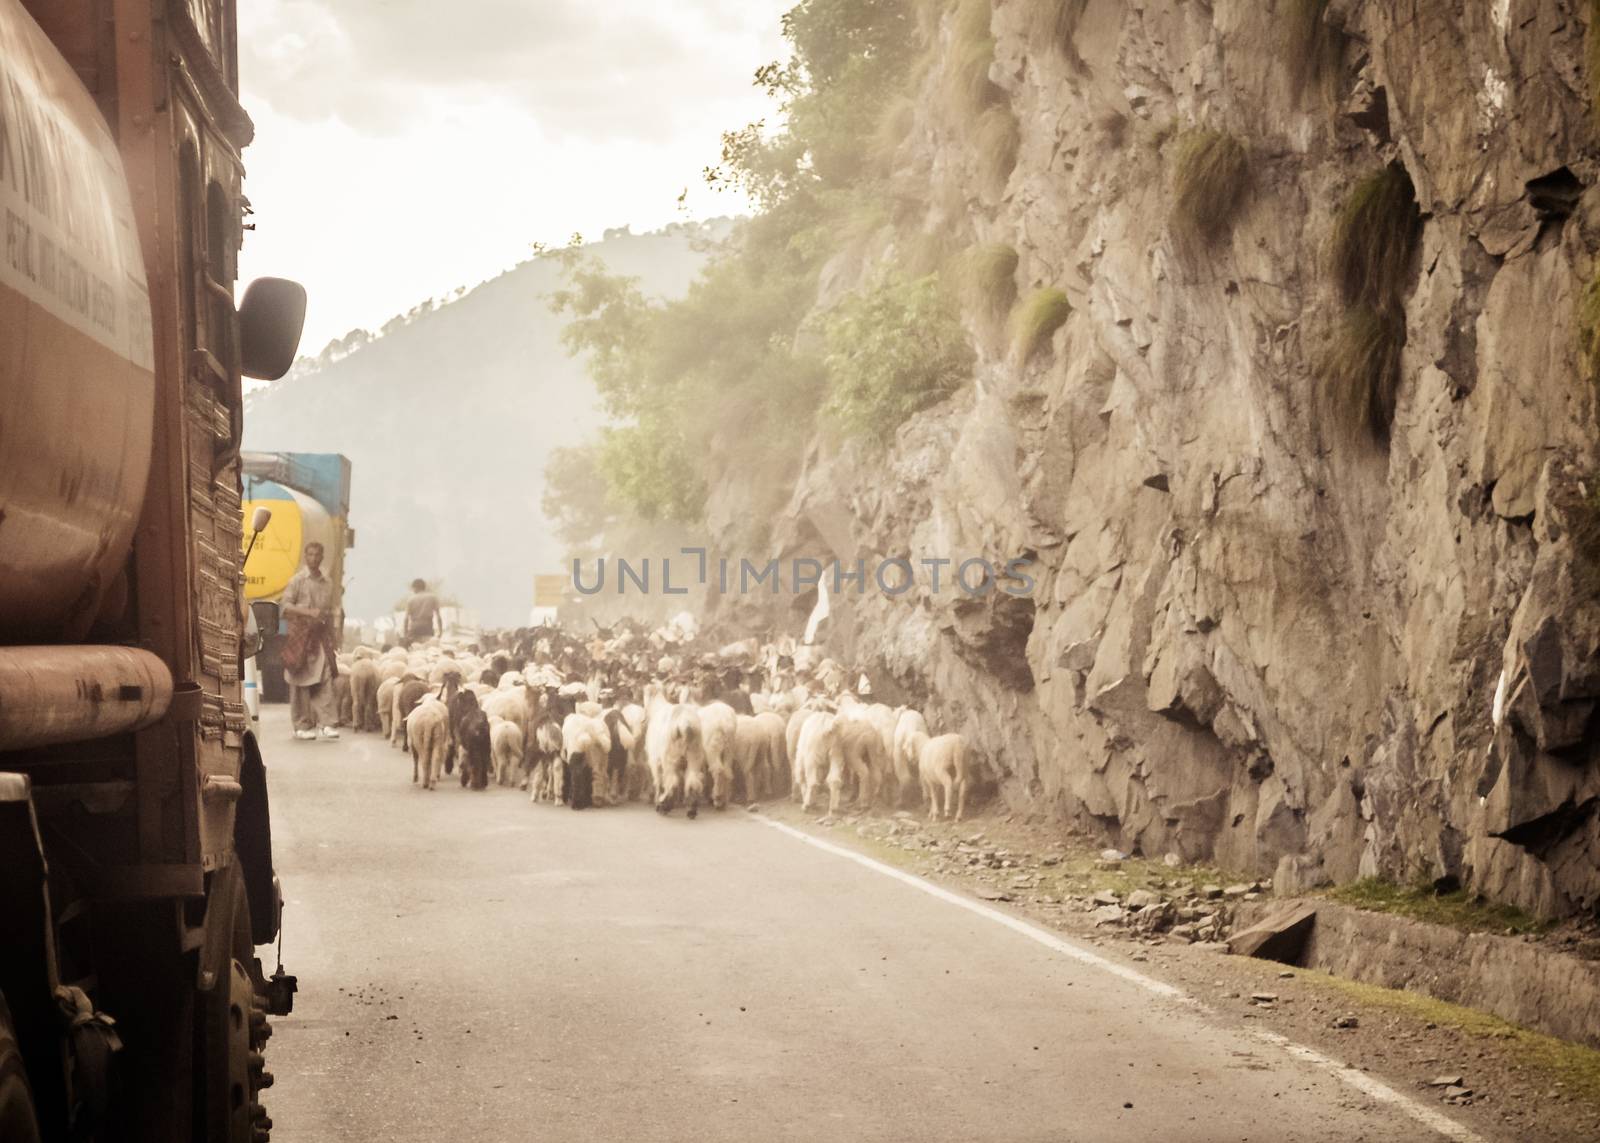 Car Point of view image. A flock of Sheep walking along a country highway in himalayan mountain pass in Leh Ladakh Manali Road of Kashmir India